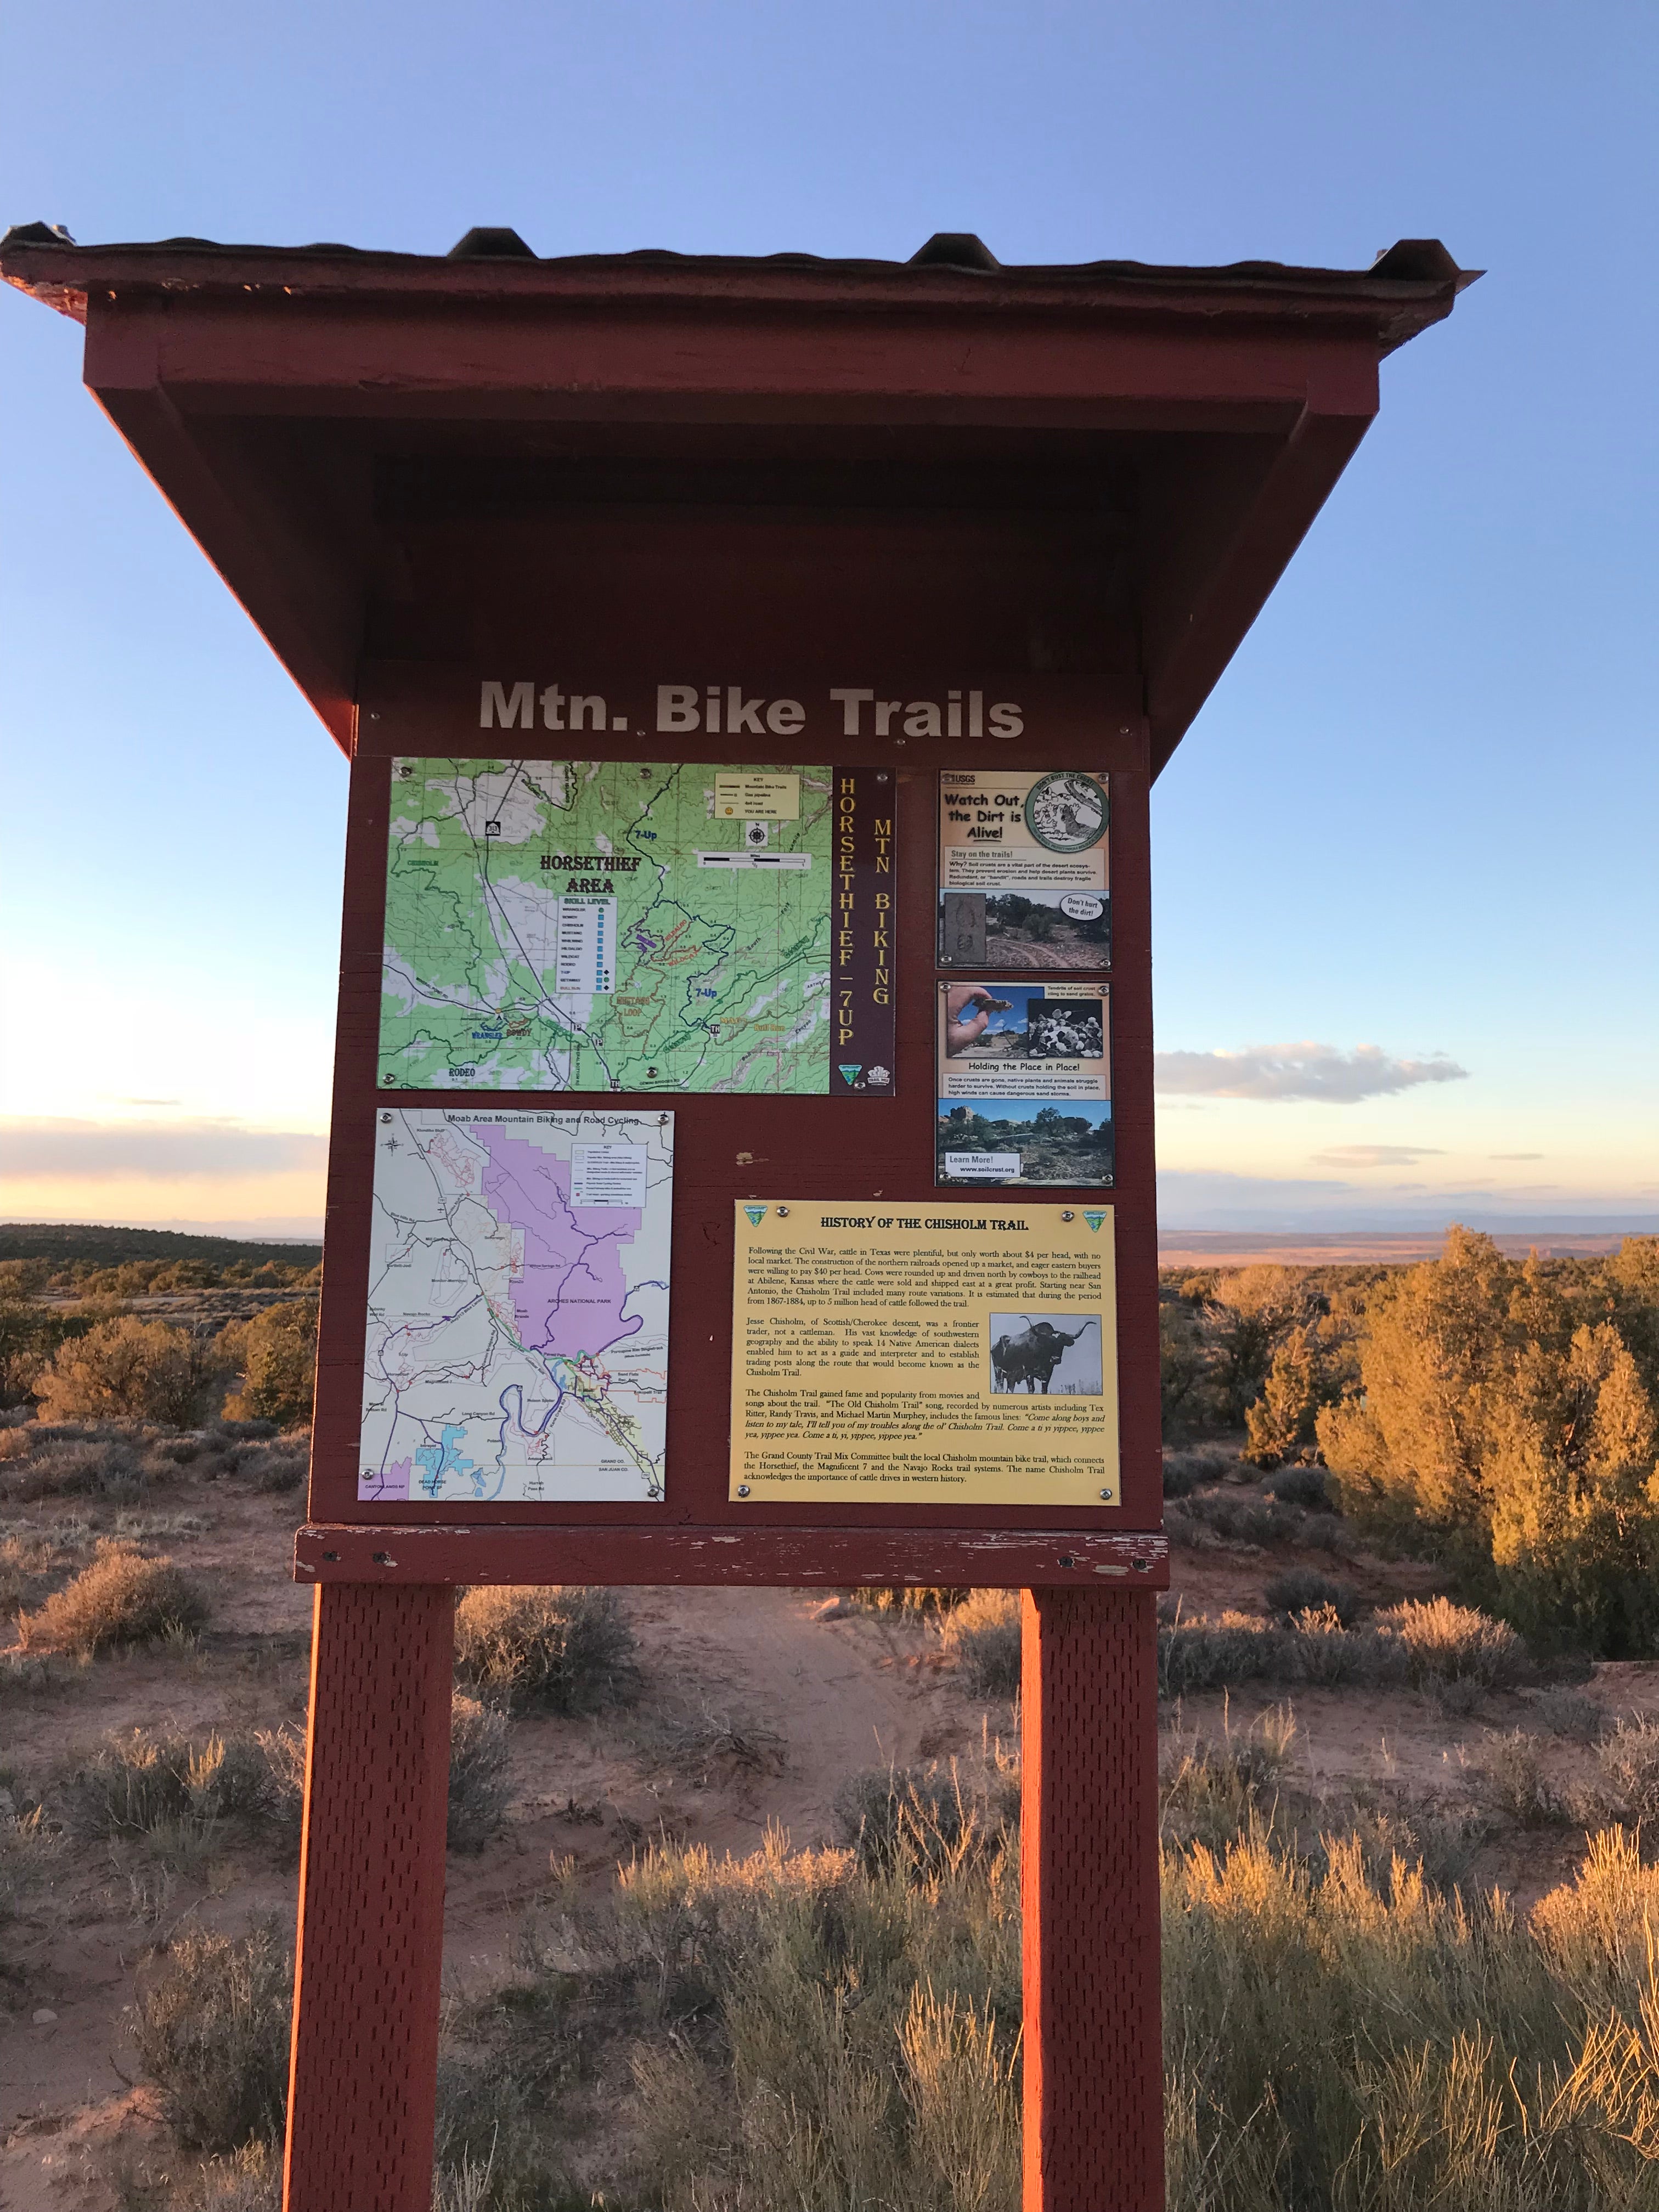 The trail sign for the close mountain bike trails.